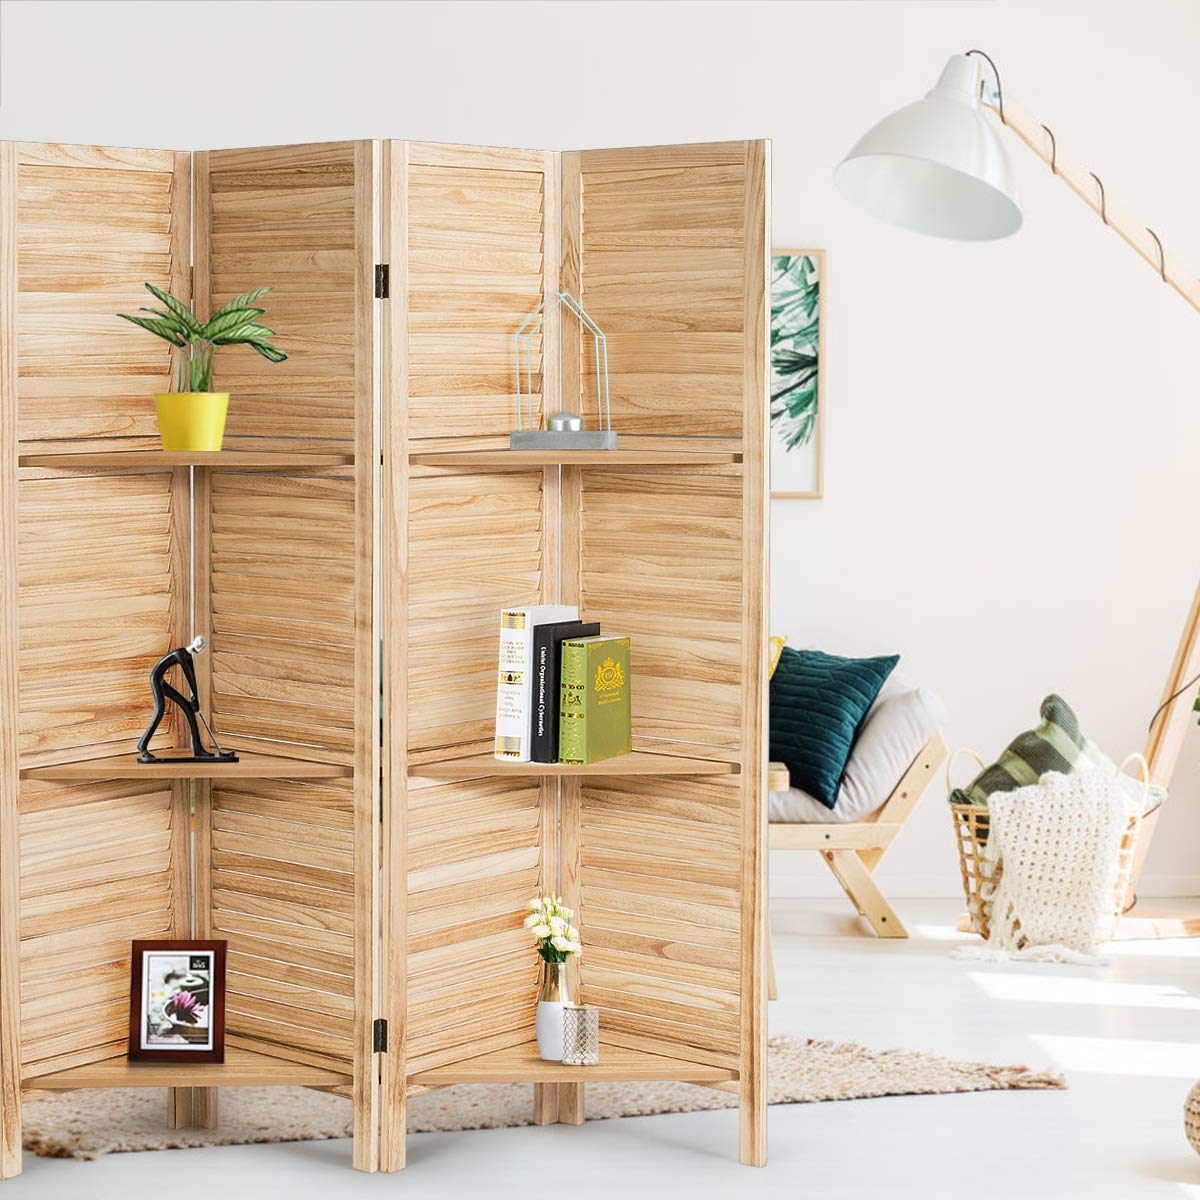 Folding Room Divider Screens With Shelves Small Space